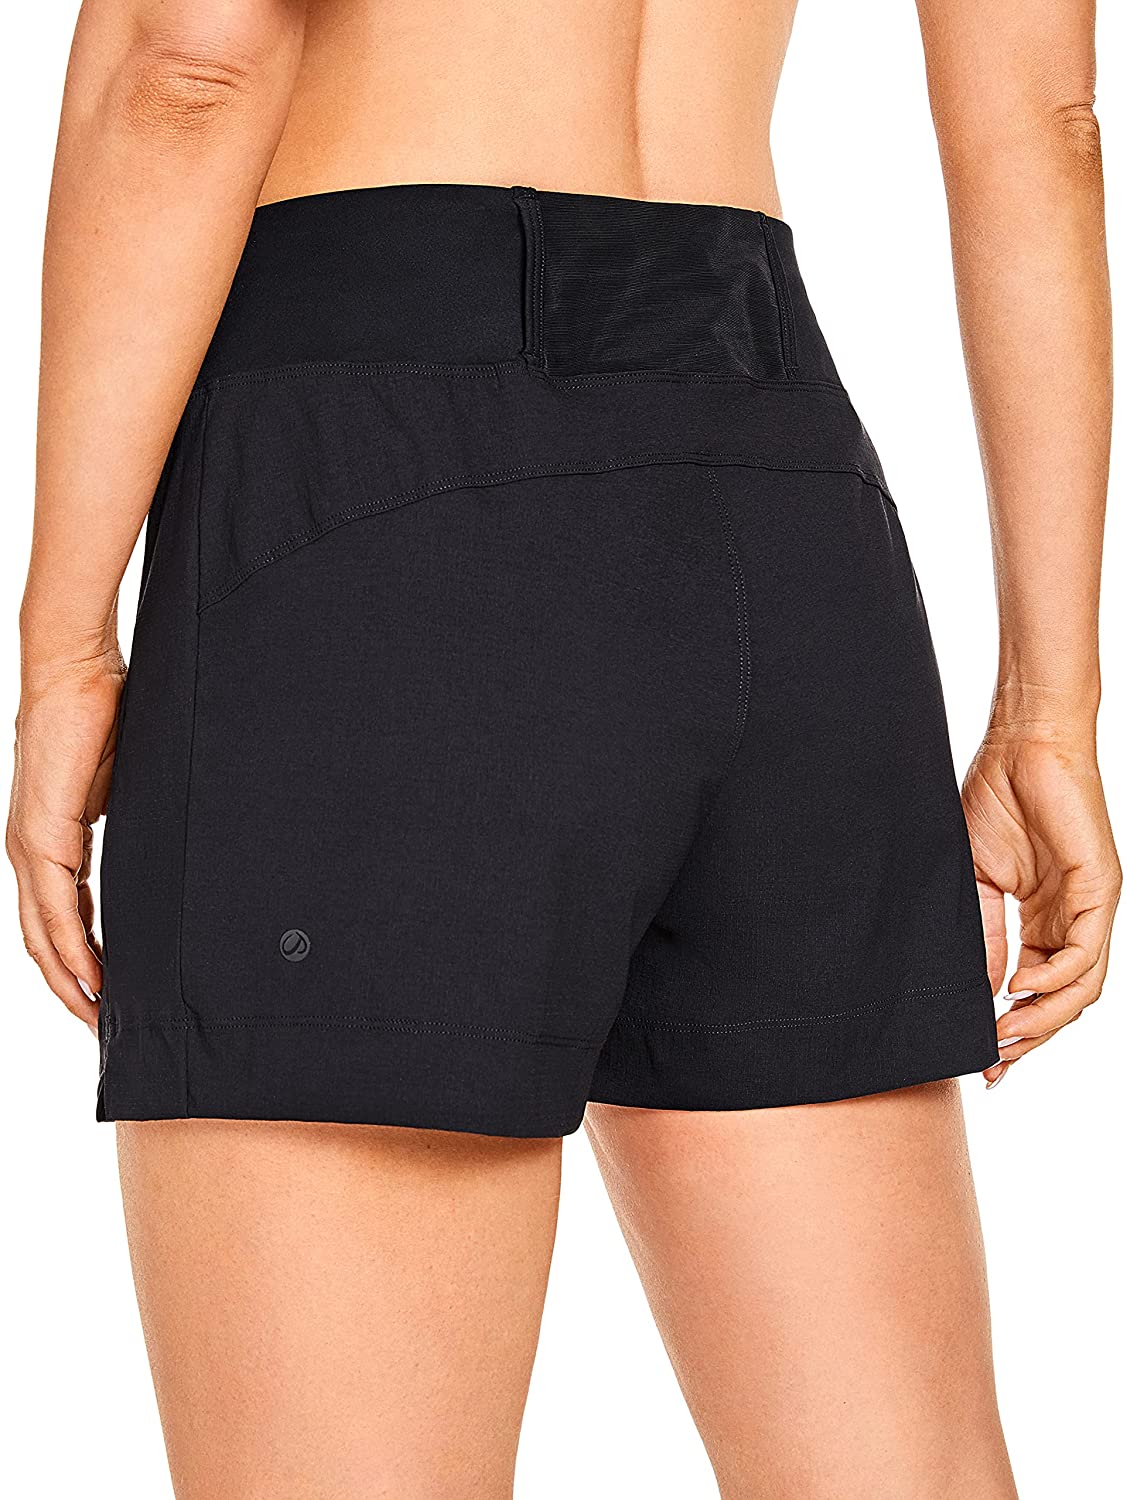 4'' CRZ YOGA Women's Lightweight Mid-Rise Travel Outdoor Hiking Shorts Quick-Dry Athletic Workout Shorts with Zip Pockets 